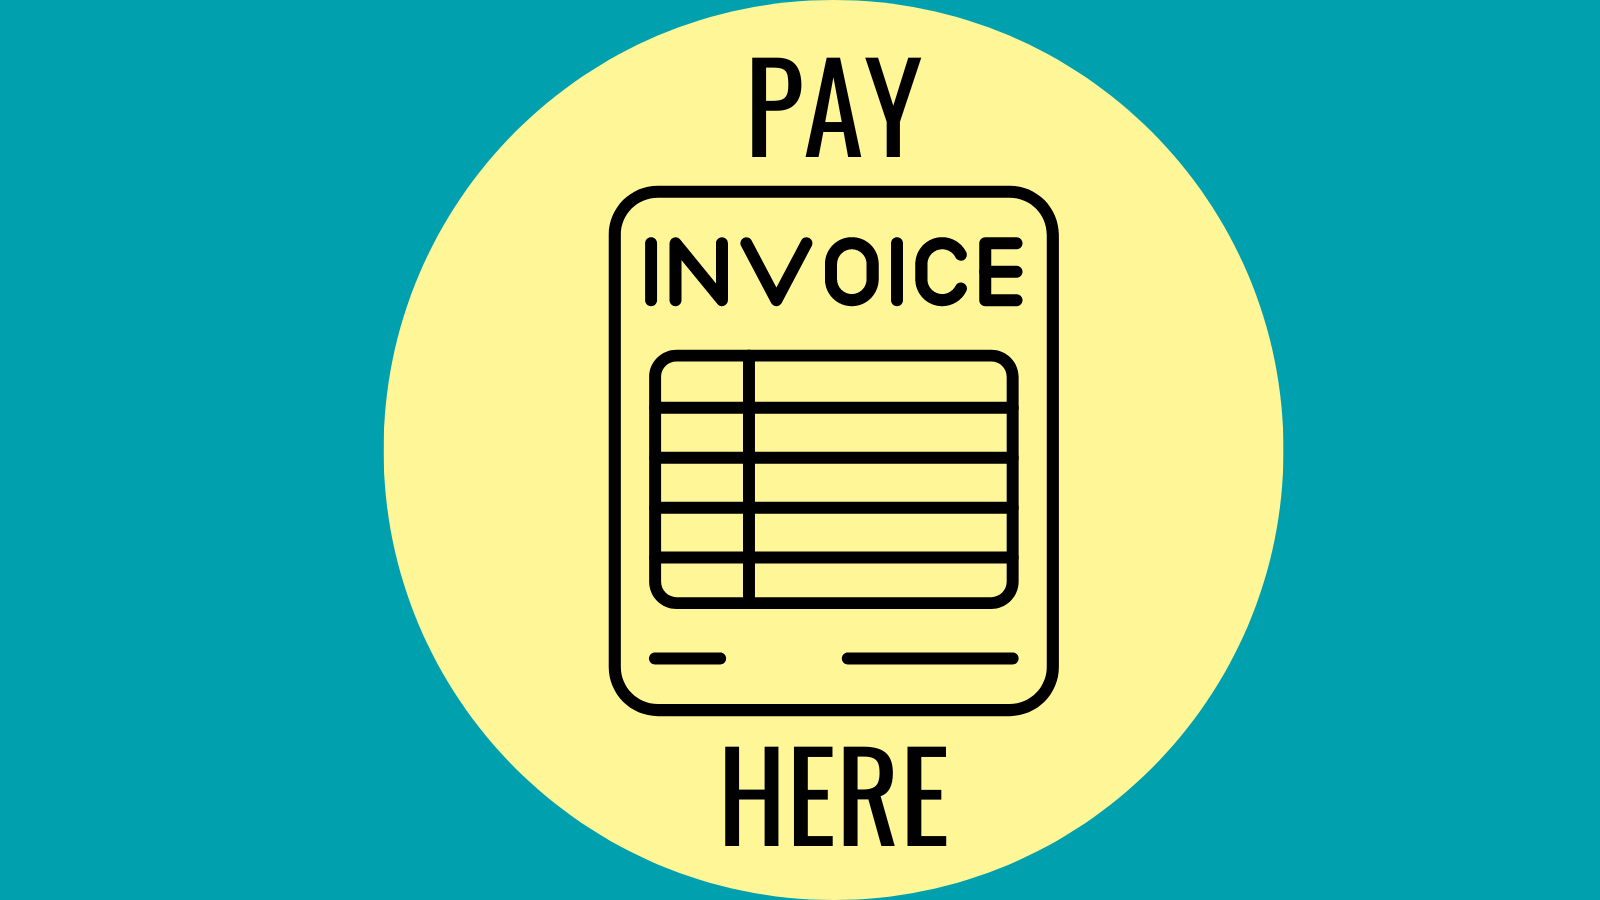 PAY invoice HERE